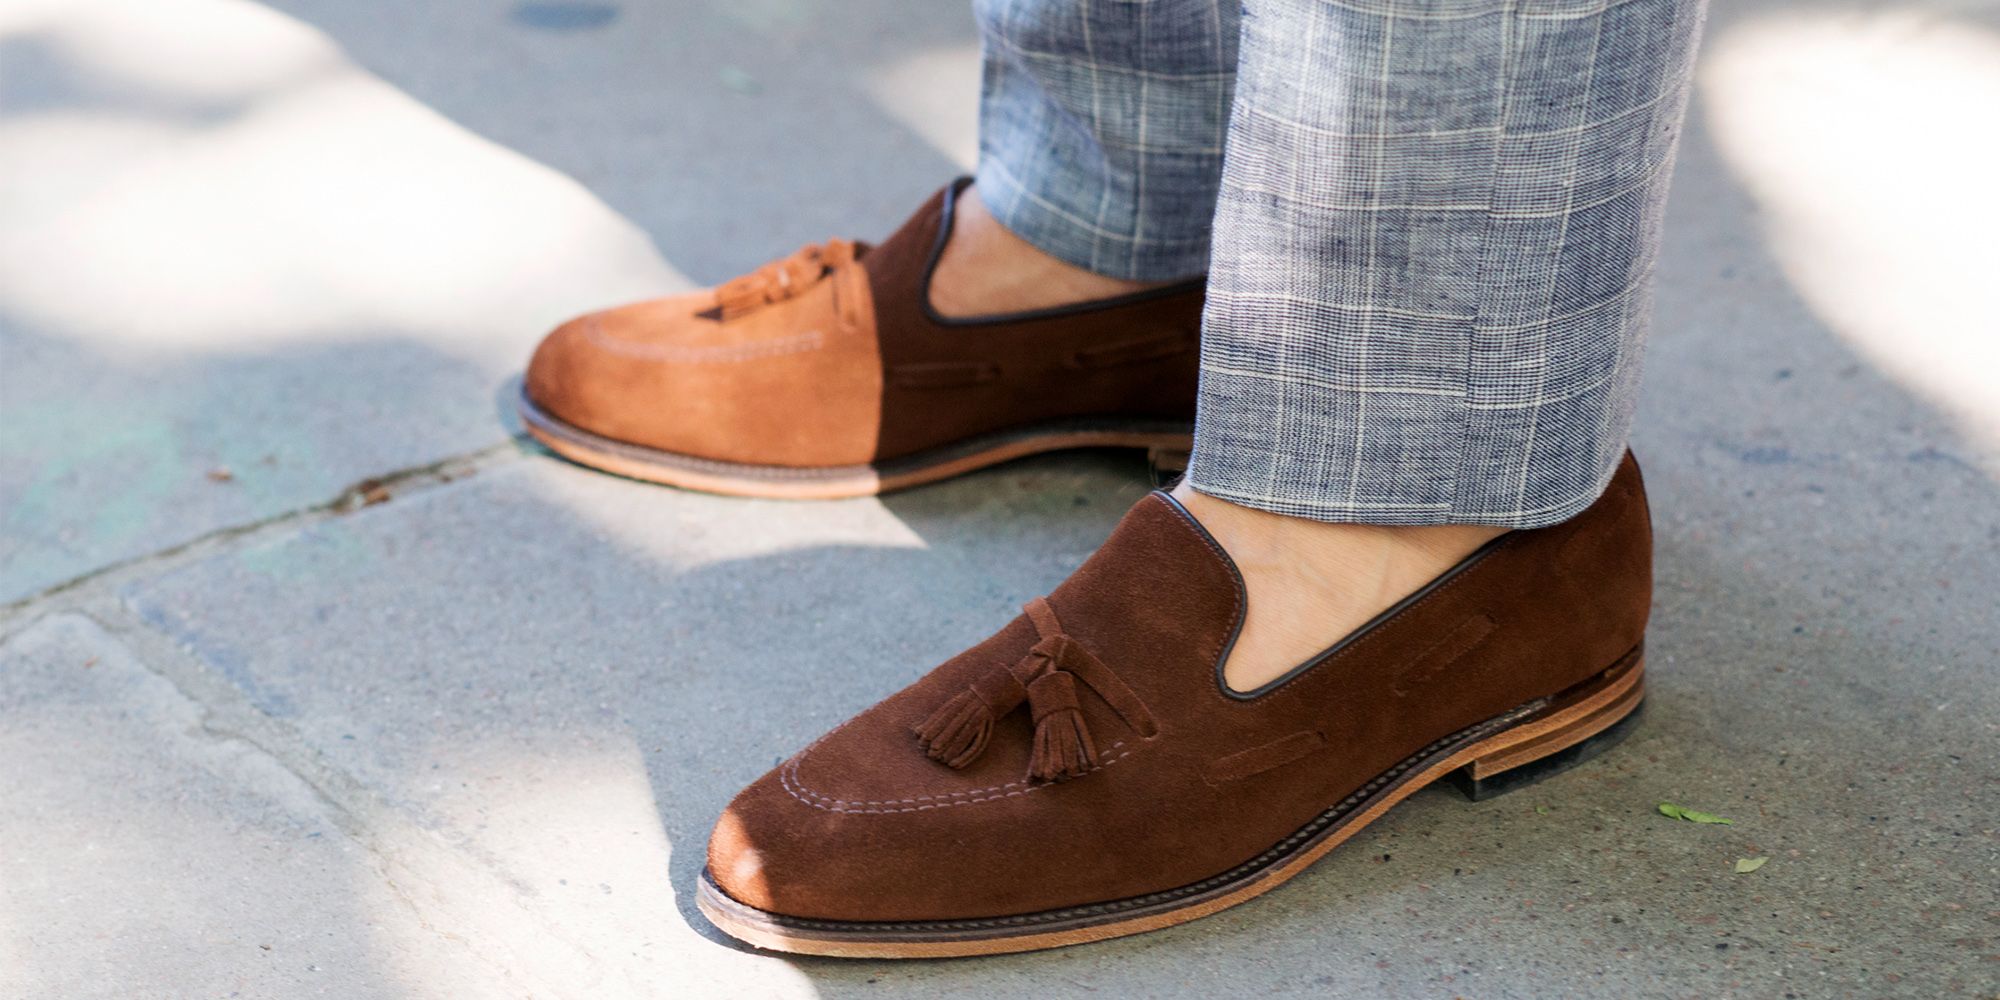 Best Loafers For Men - Get these Slip 